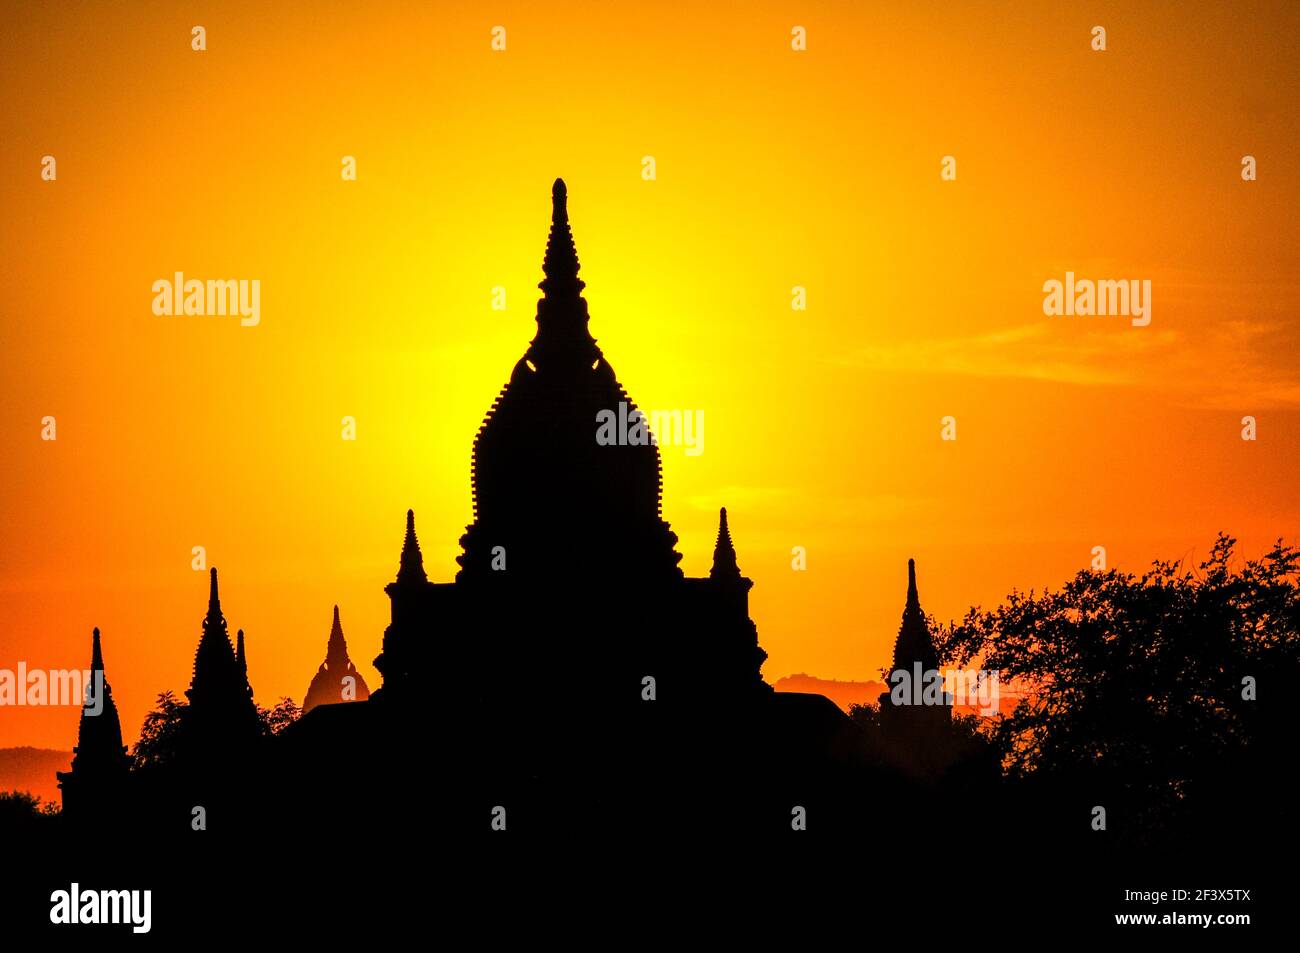 Silhouette of pagodas in Bagan during sunset, Myanmar. Stock Photo